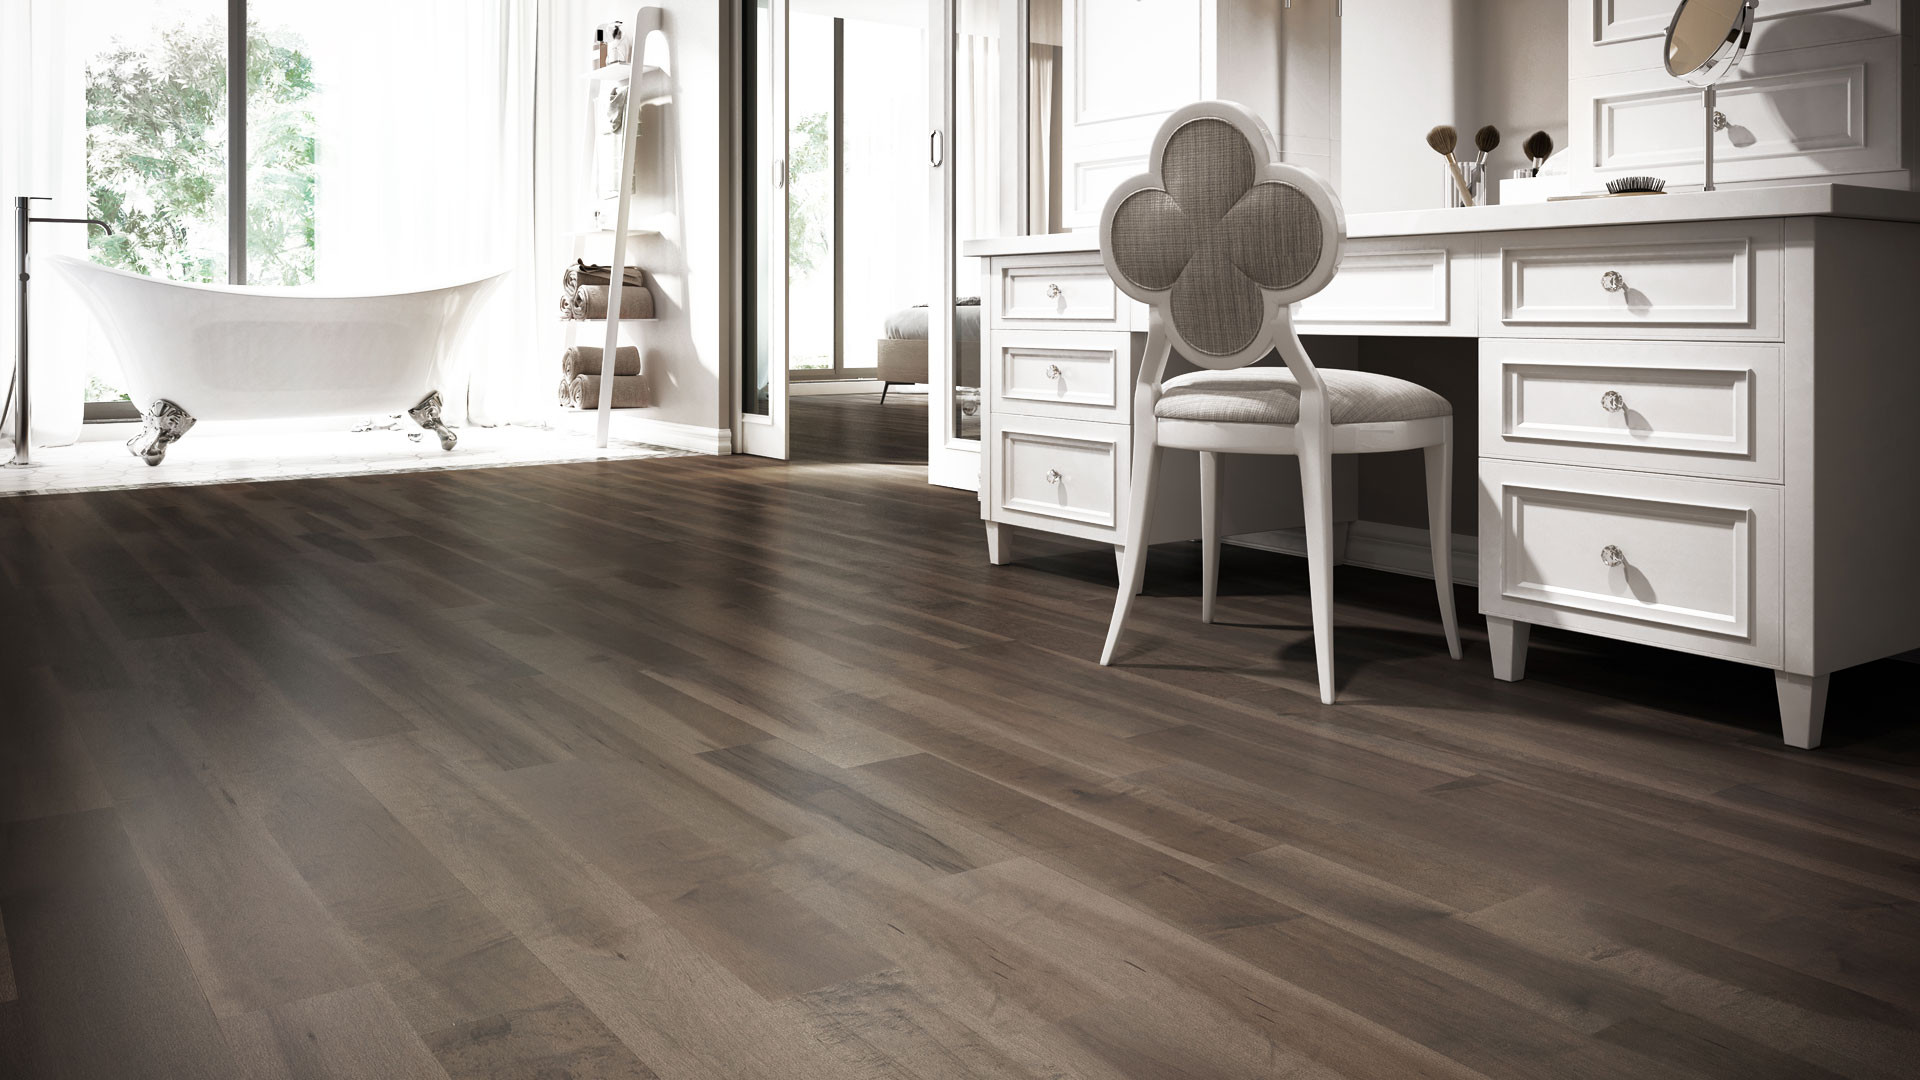 29 Stylish Hardwood Flooring Jobs toronto 2024 free download hardwood flooring jobs toronto of 4 latest hardwood flooring trends lauzon flooring in learn more about our pure genius by reading our blog post the smartest hardwood flooring weve ever seen